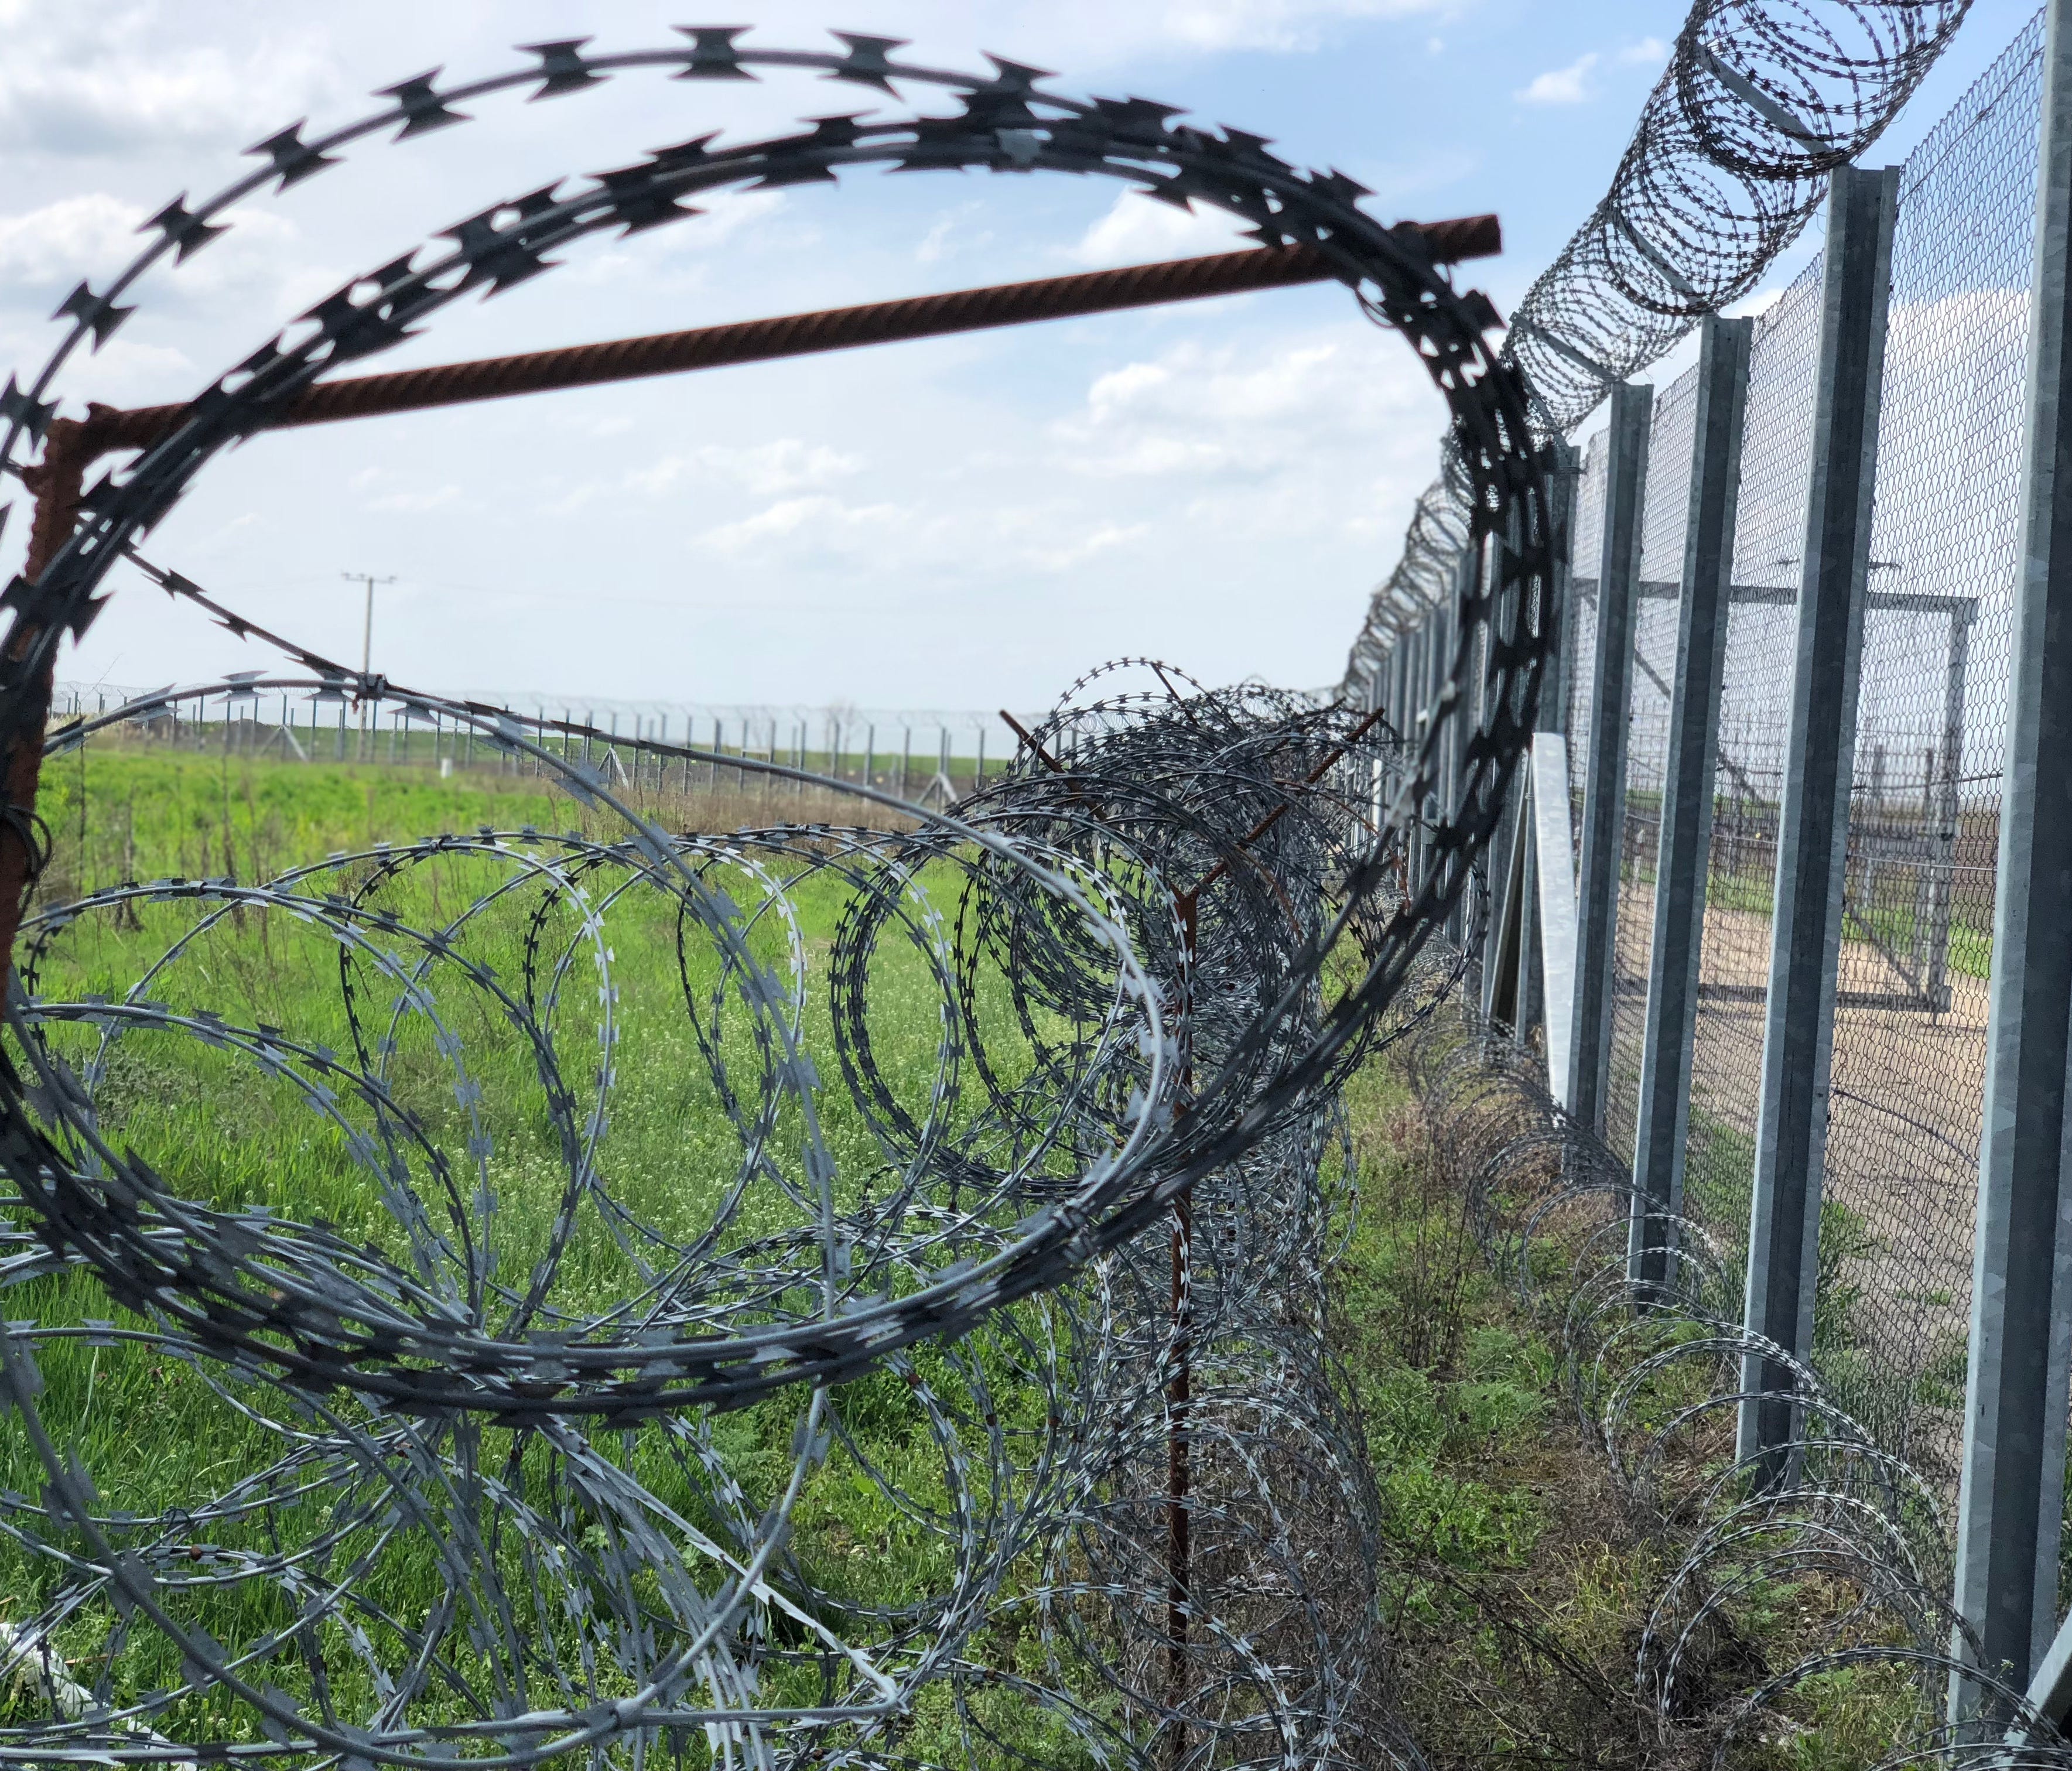 Barbed wire is seen near the end of border fence in Hungary near the country's international boundary with Serbia and Romania, on April 13, 2018.